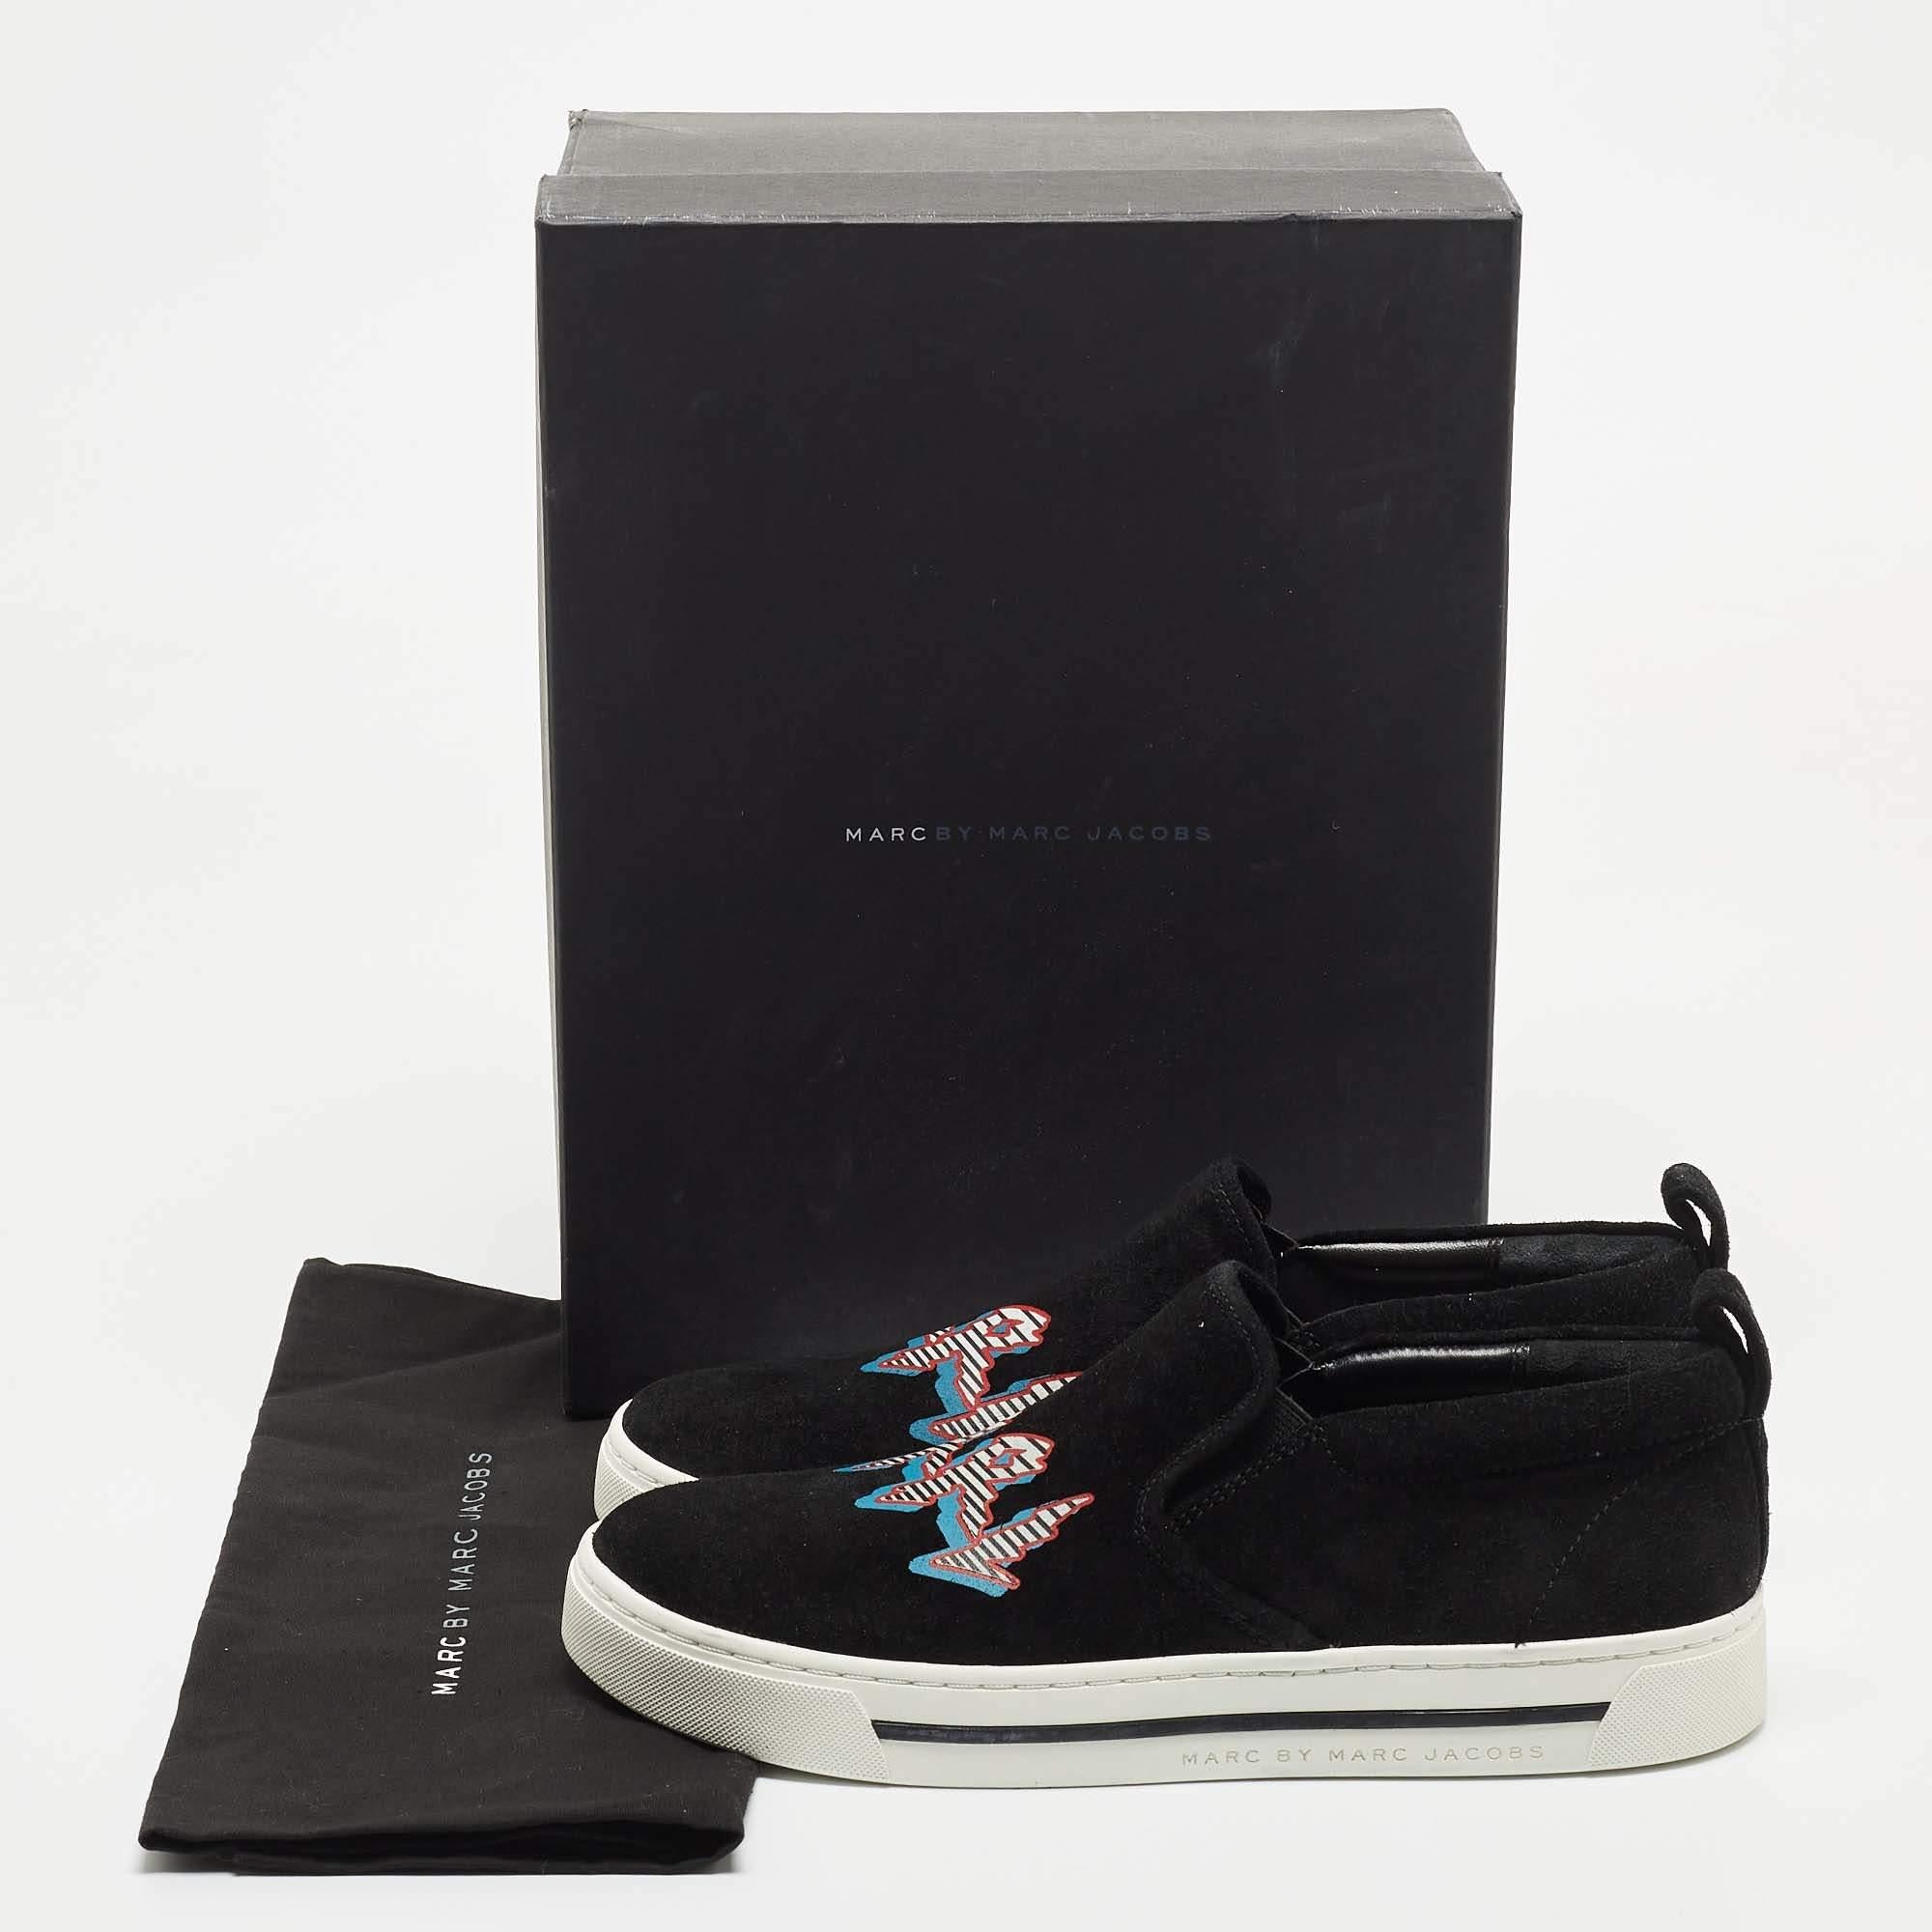 Marc By Marc Jacobs Black Suede GRRL Slip On Sneakers Size 37 For Sale 4